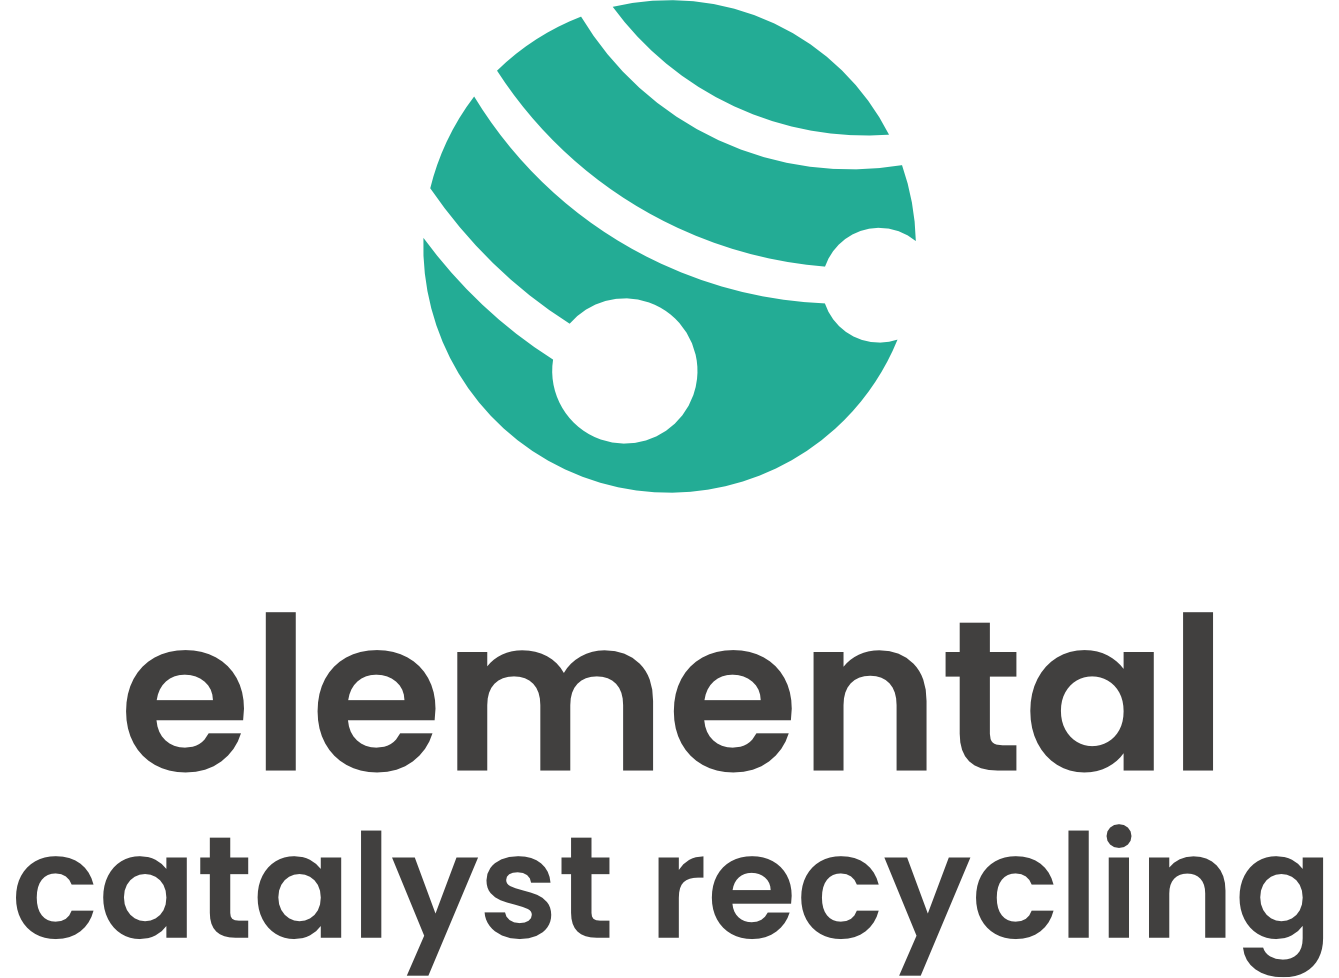 Elemental Catalyst Recycling